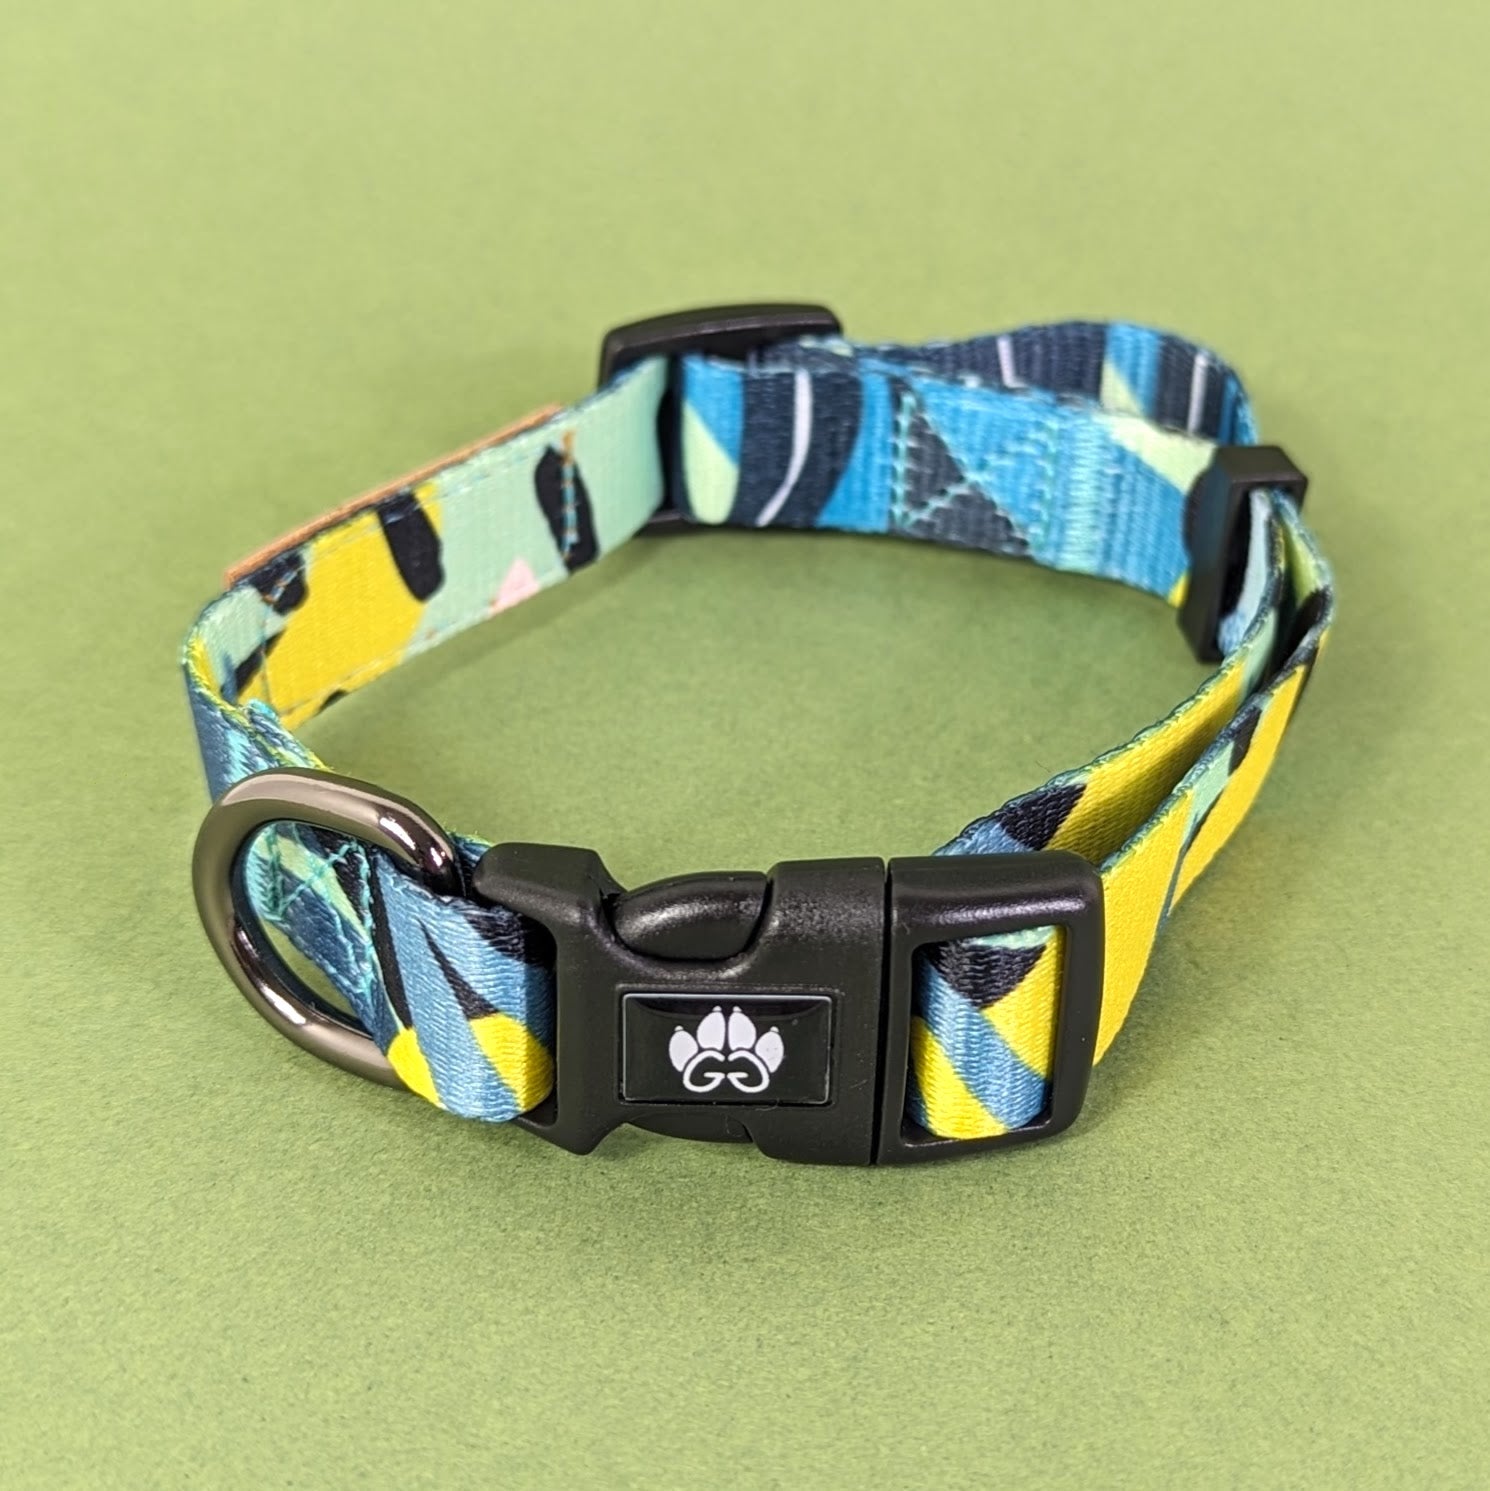 Polyester and fabric collars for your dog